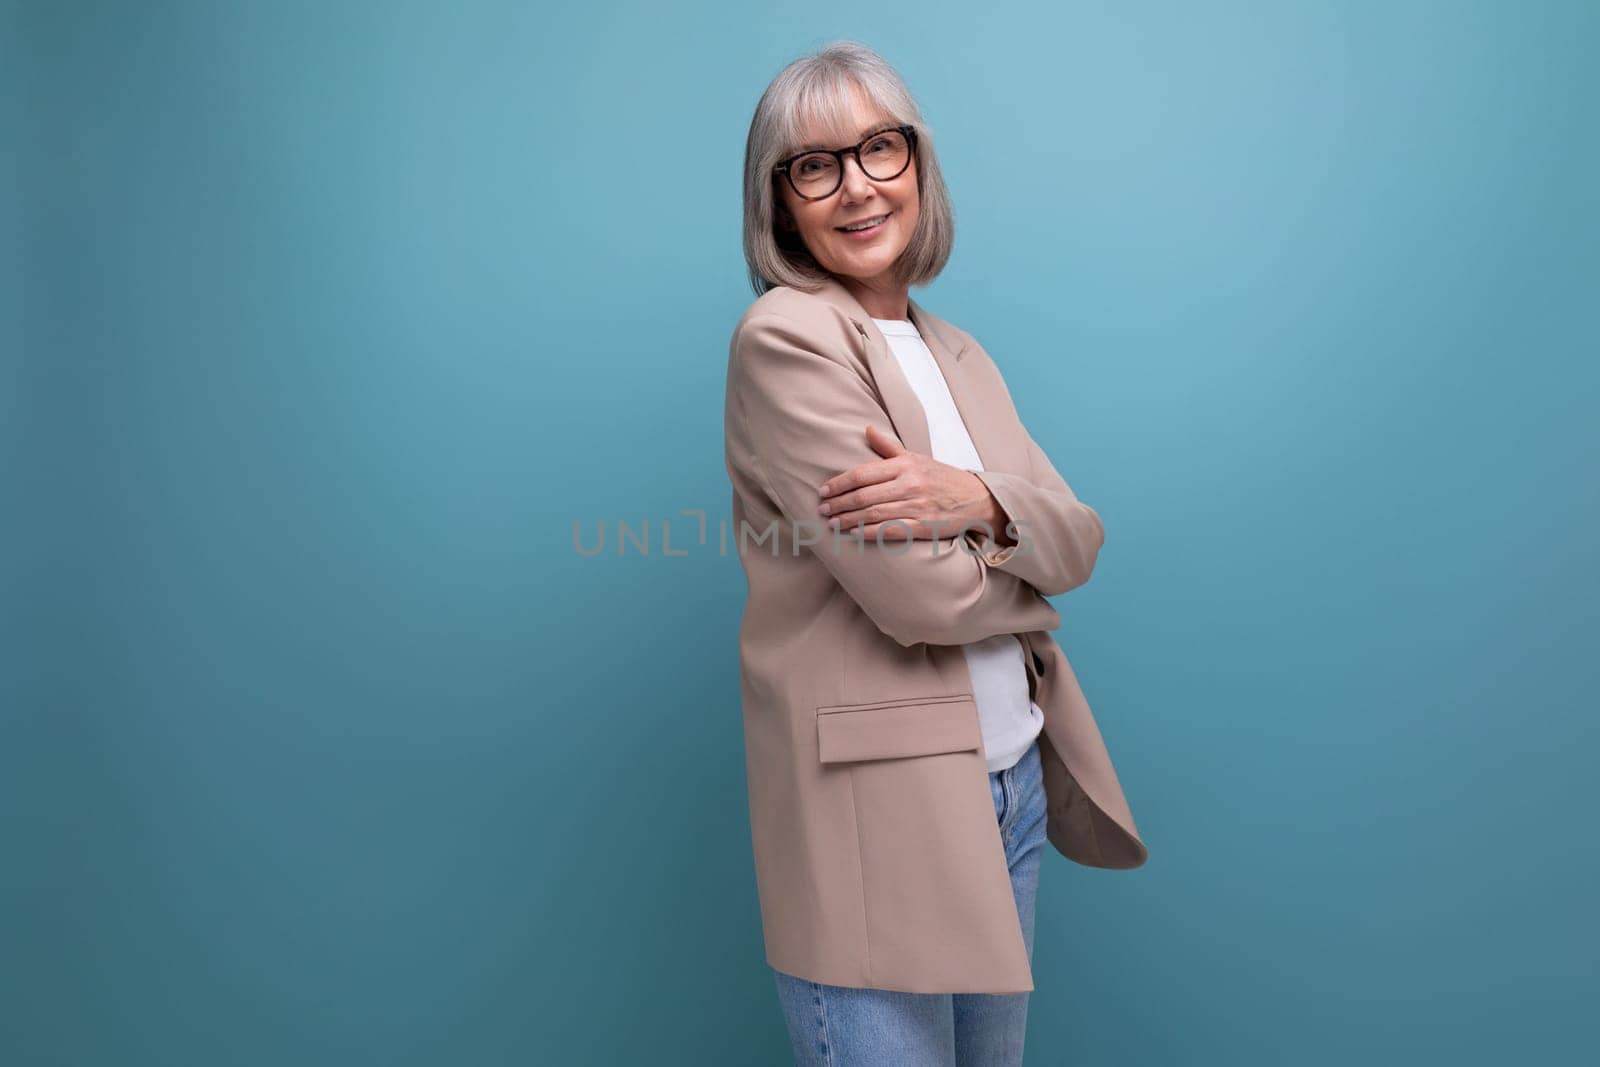 successful middle-aged woman grandmother with gray hair in a jacket on a bright background with copy space.